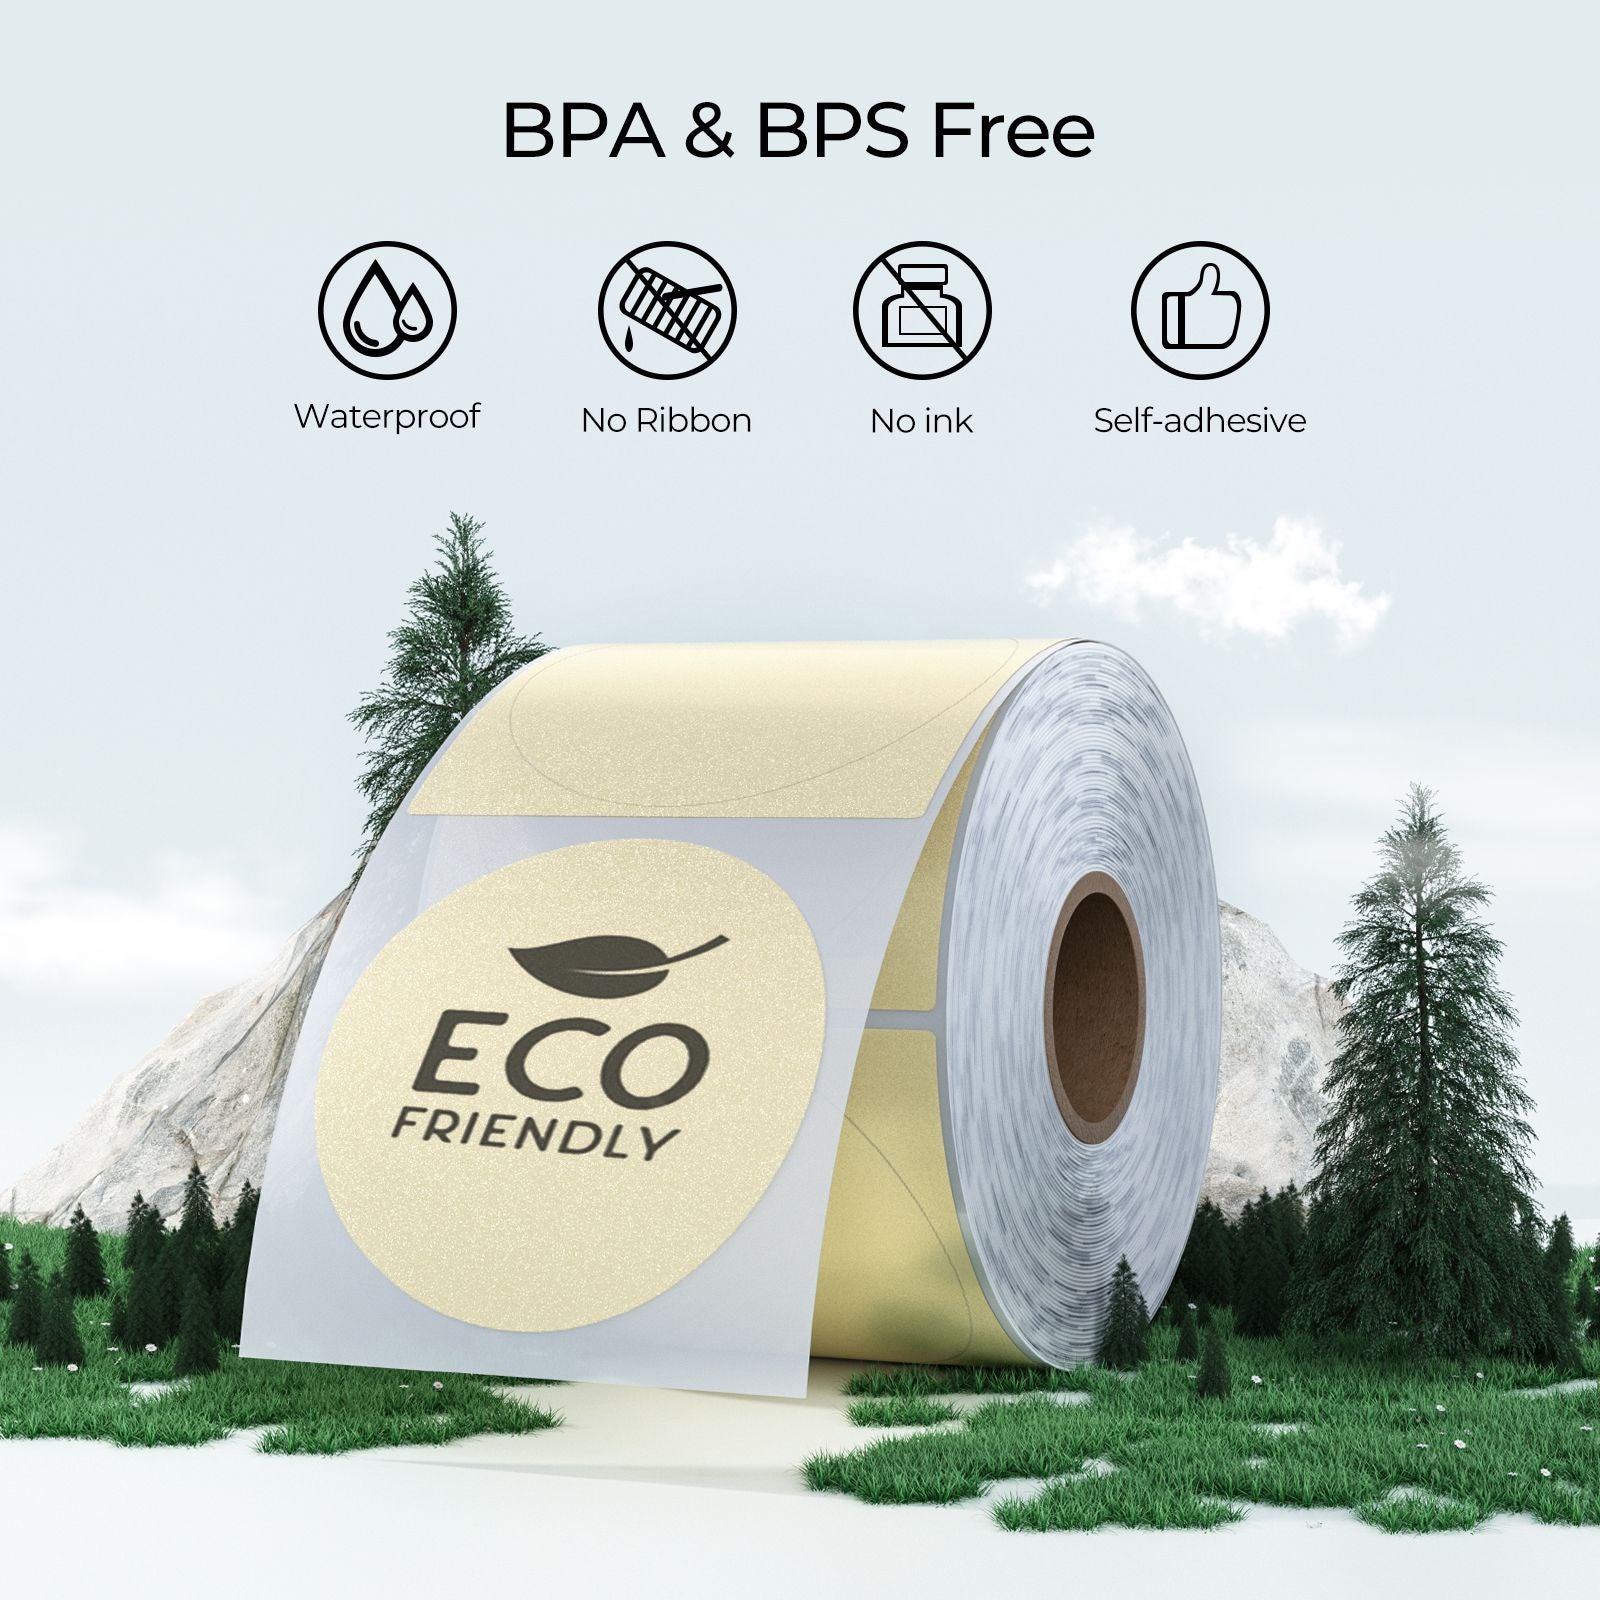 MUNBYN gold sticker labels are BPA&BPS-Free, easy to peel and stick, making the labelling process quick and effortless. 